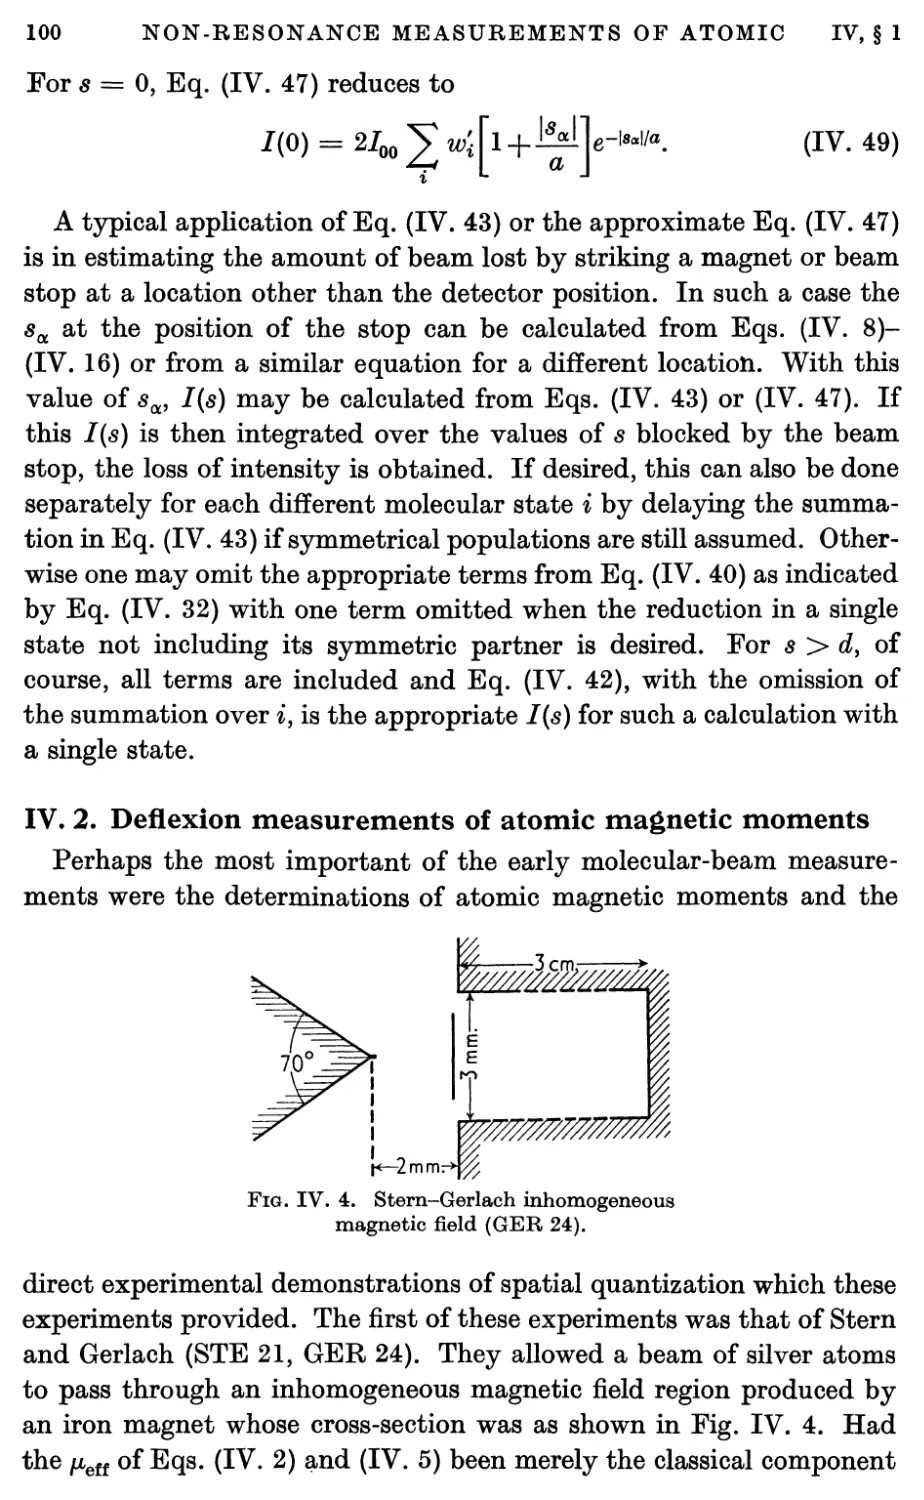 IV.2. Deflexion Measurements of Atomic Magnetic Moments